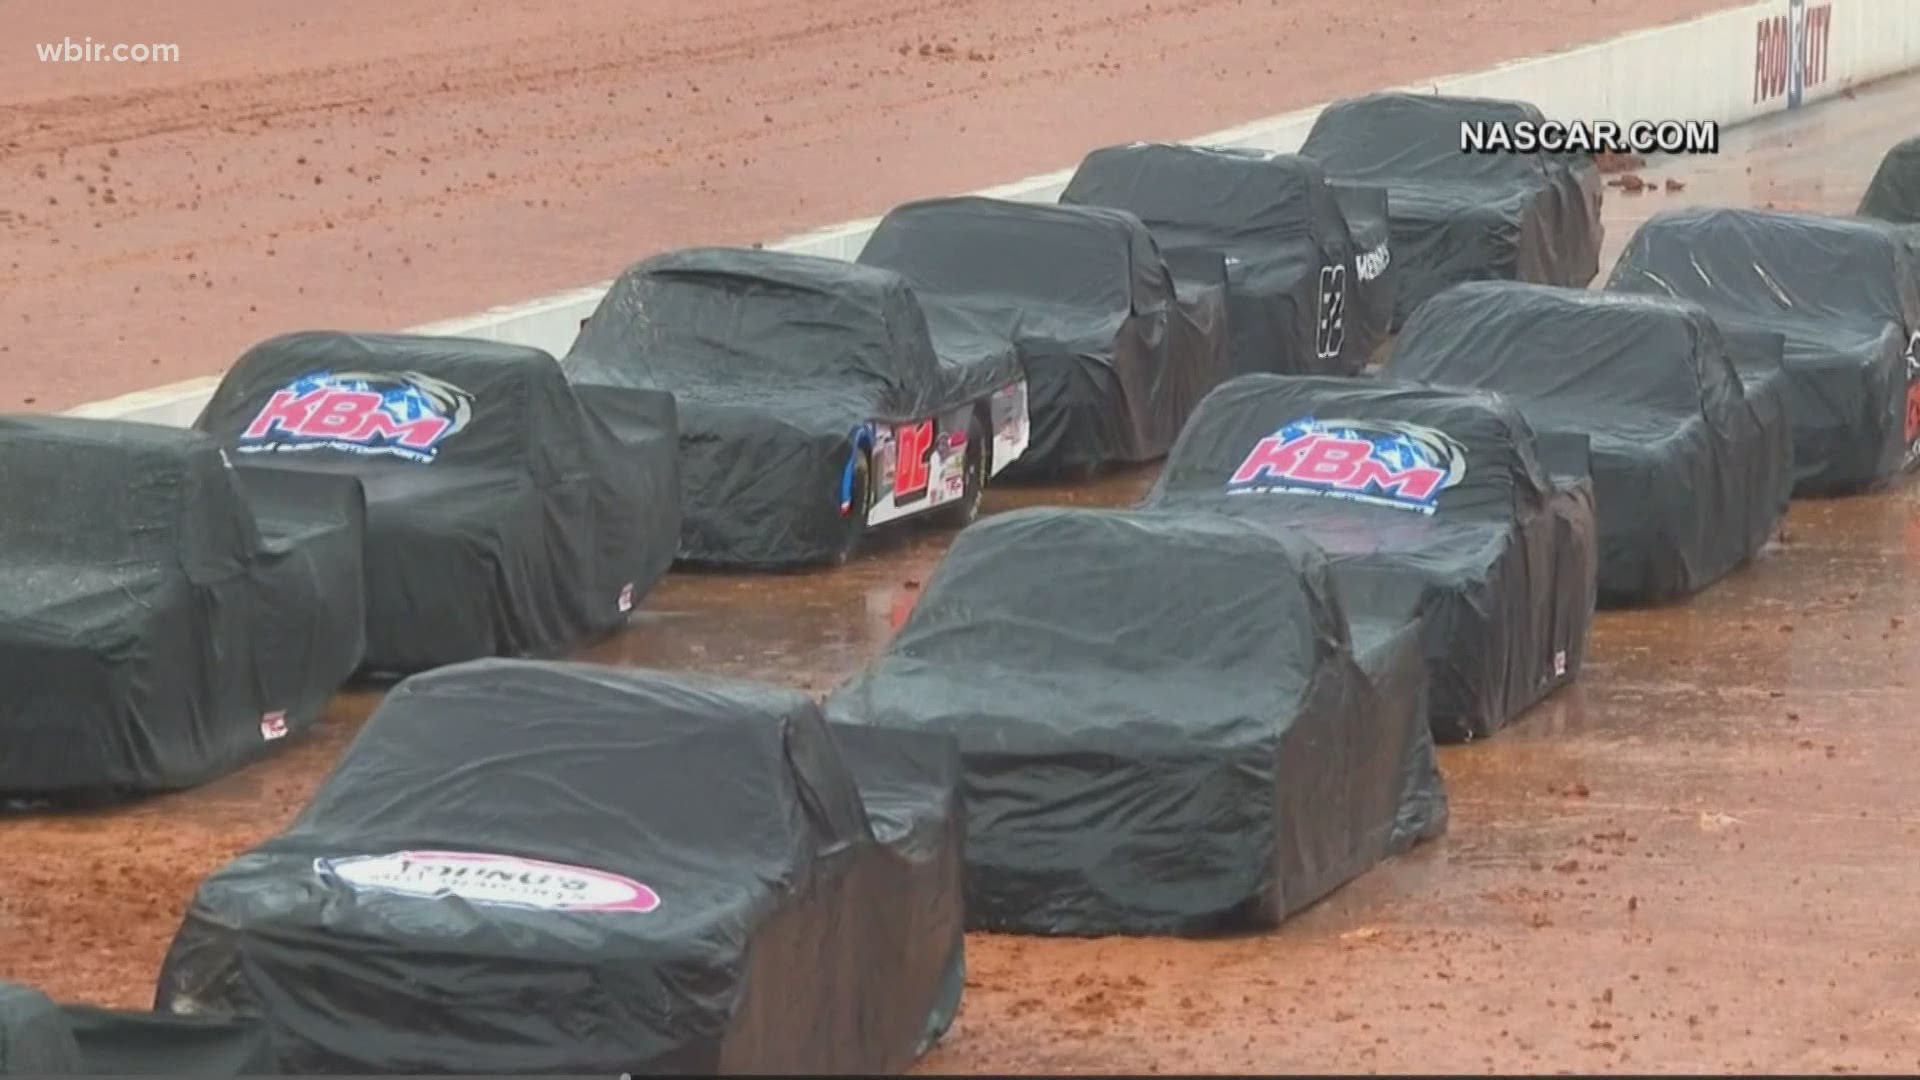 Qualifying races for both the Cup Series and Camping World Truck Series have been canceled at Bristol.